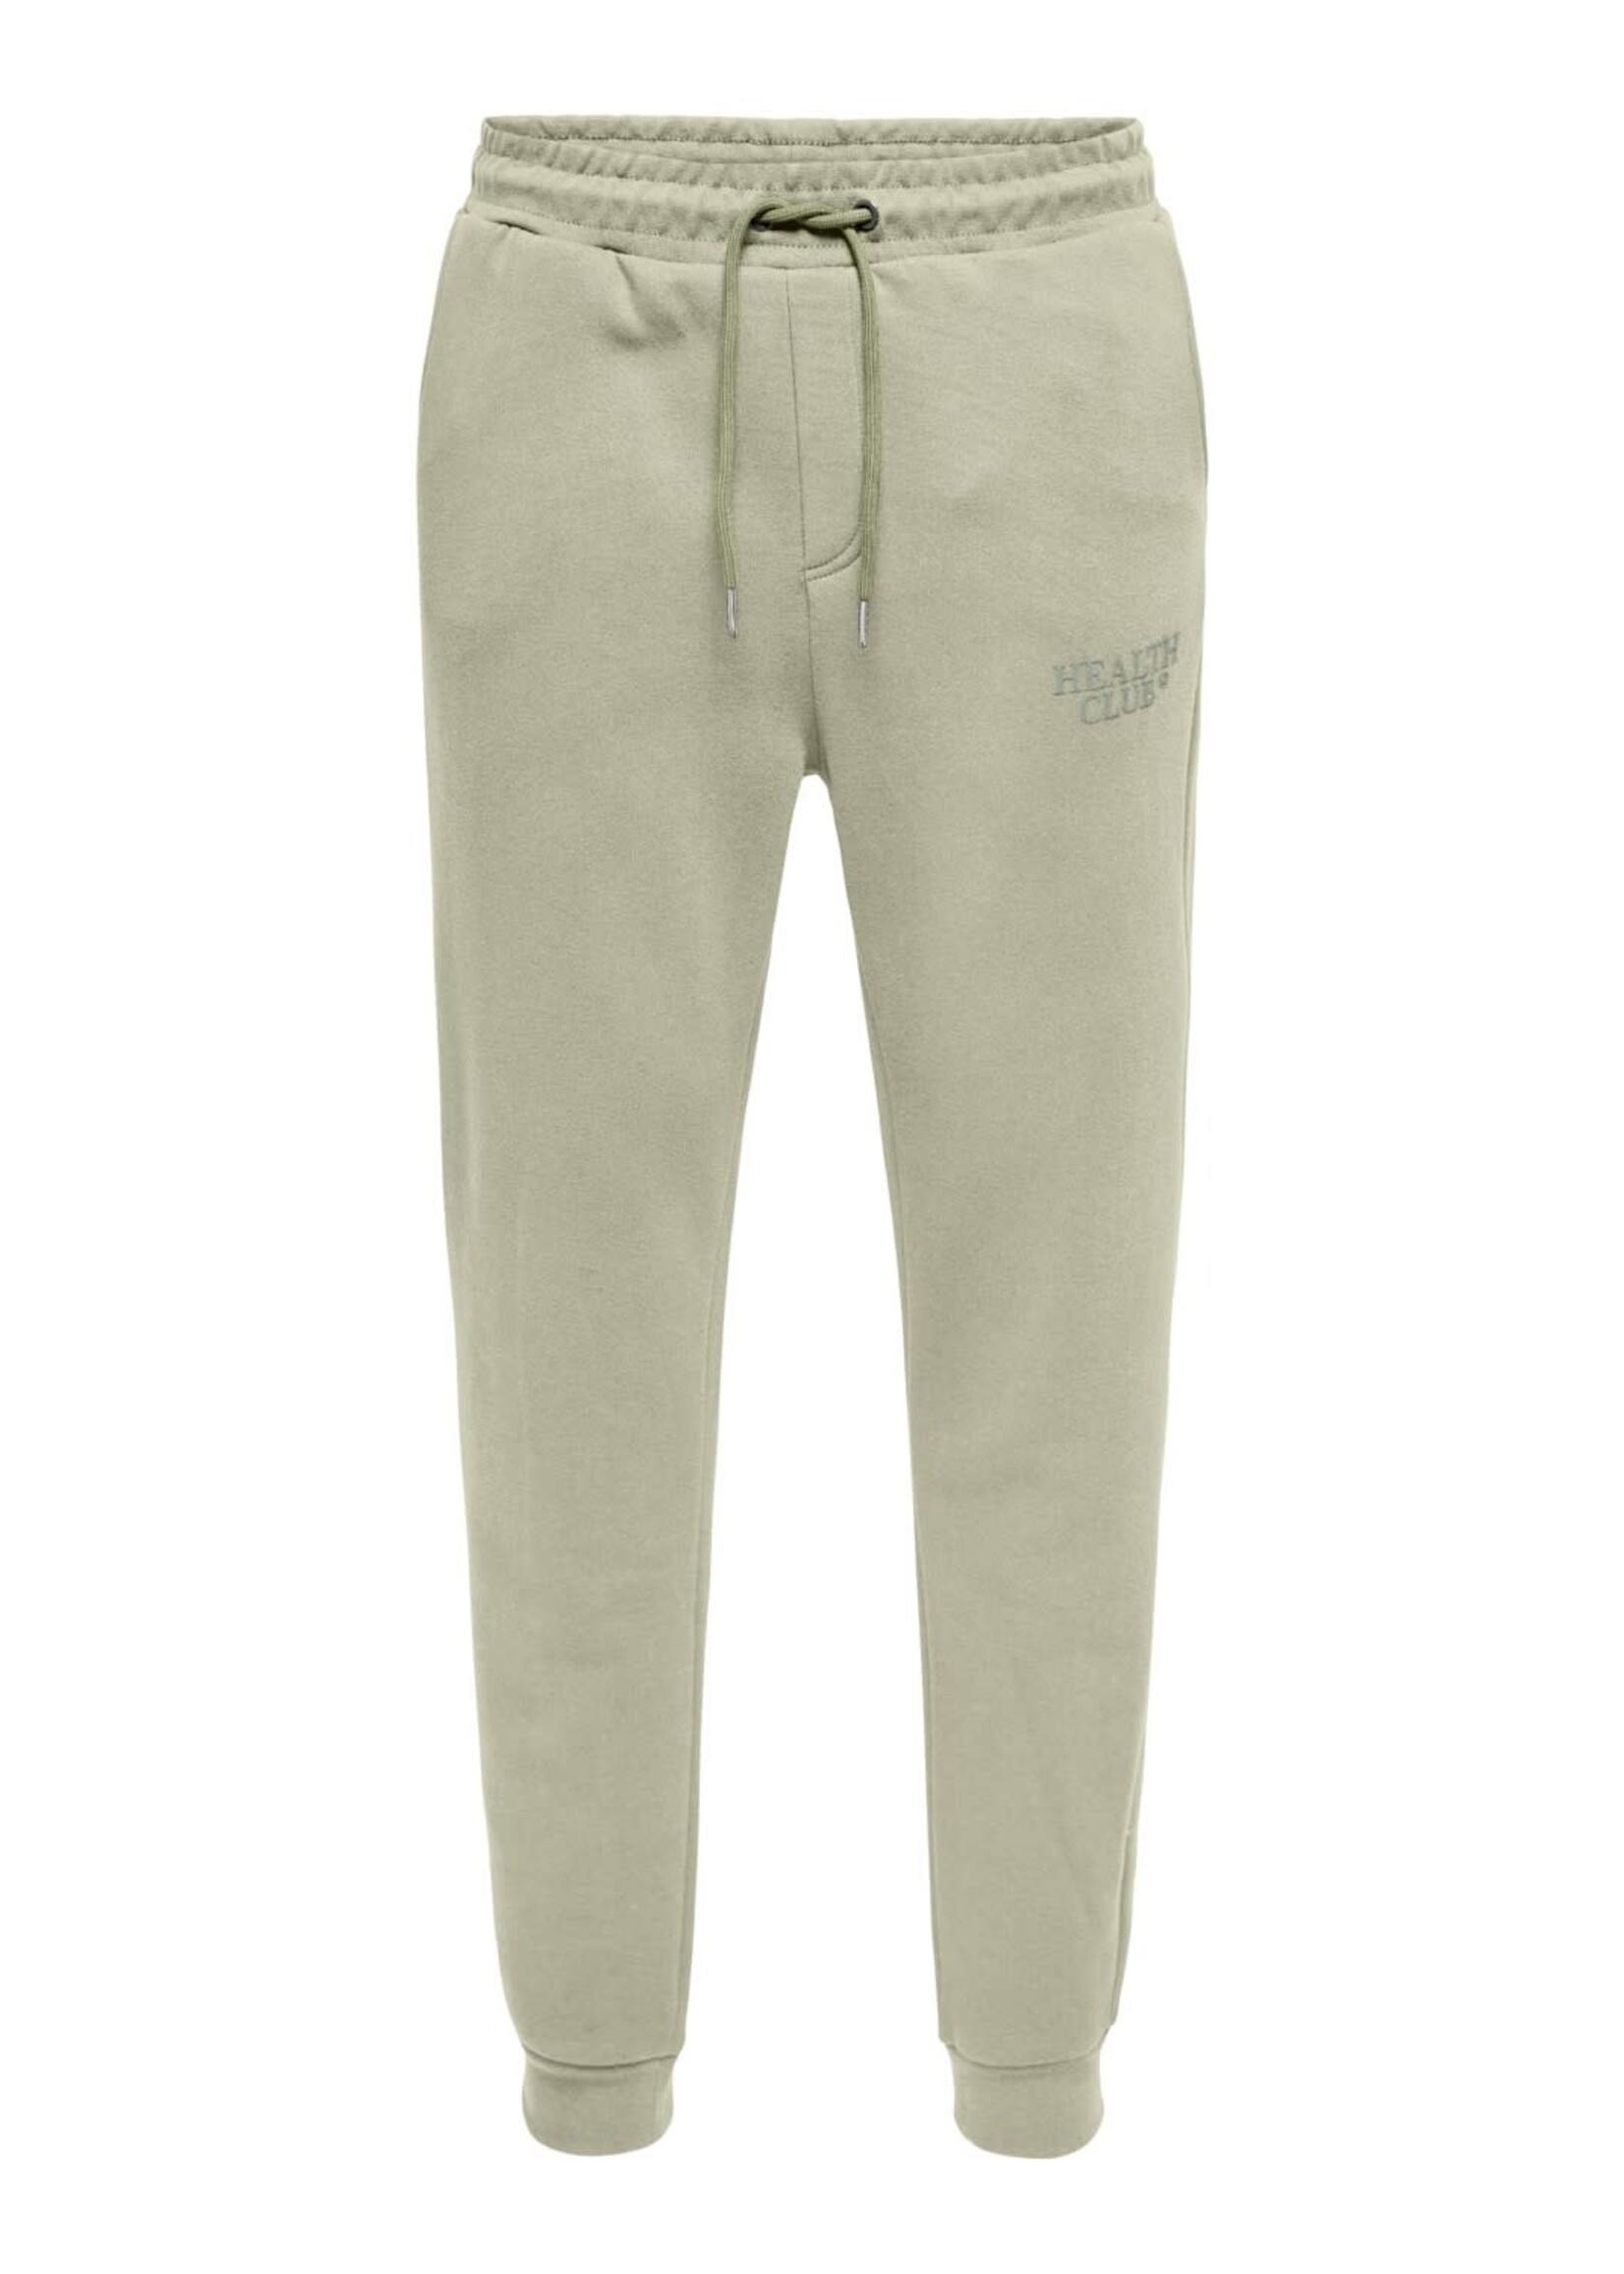 Only & Sons Tom Sweatpants Athletic Club Silver Sage